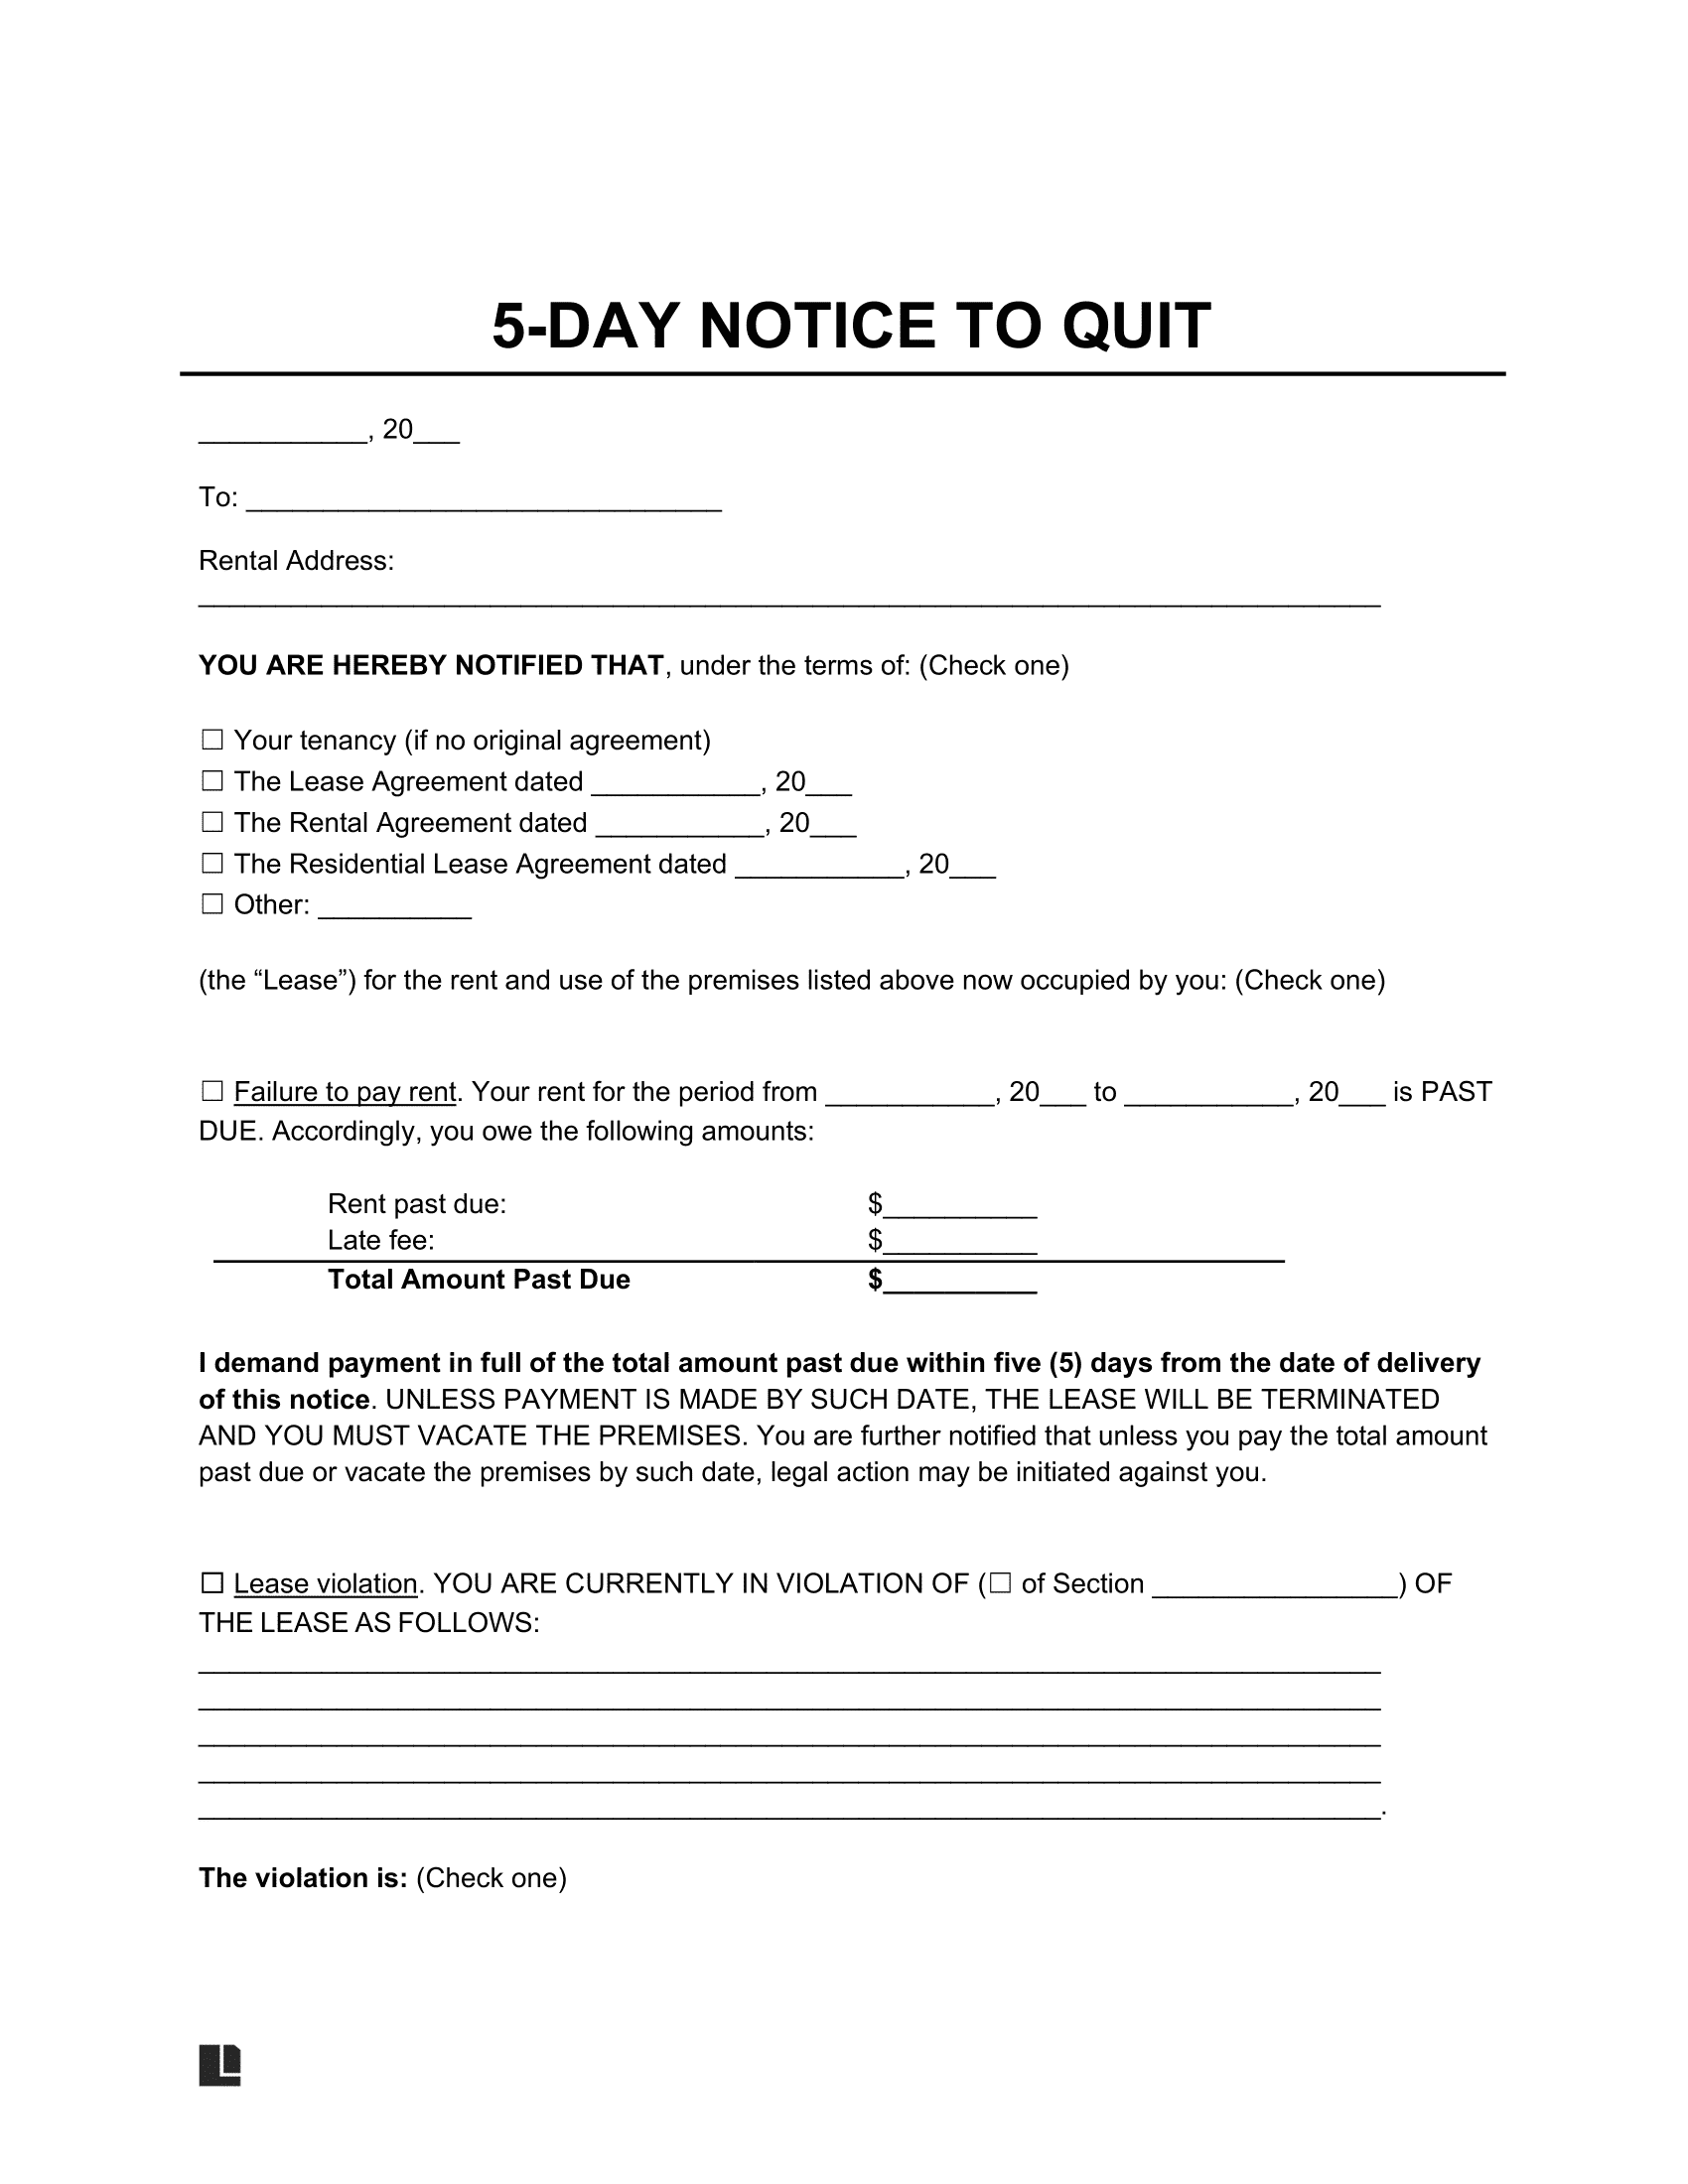 5-Day Eviction Notice to Quit Template